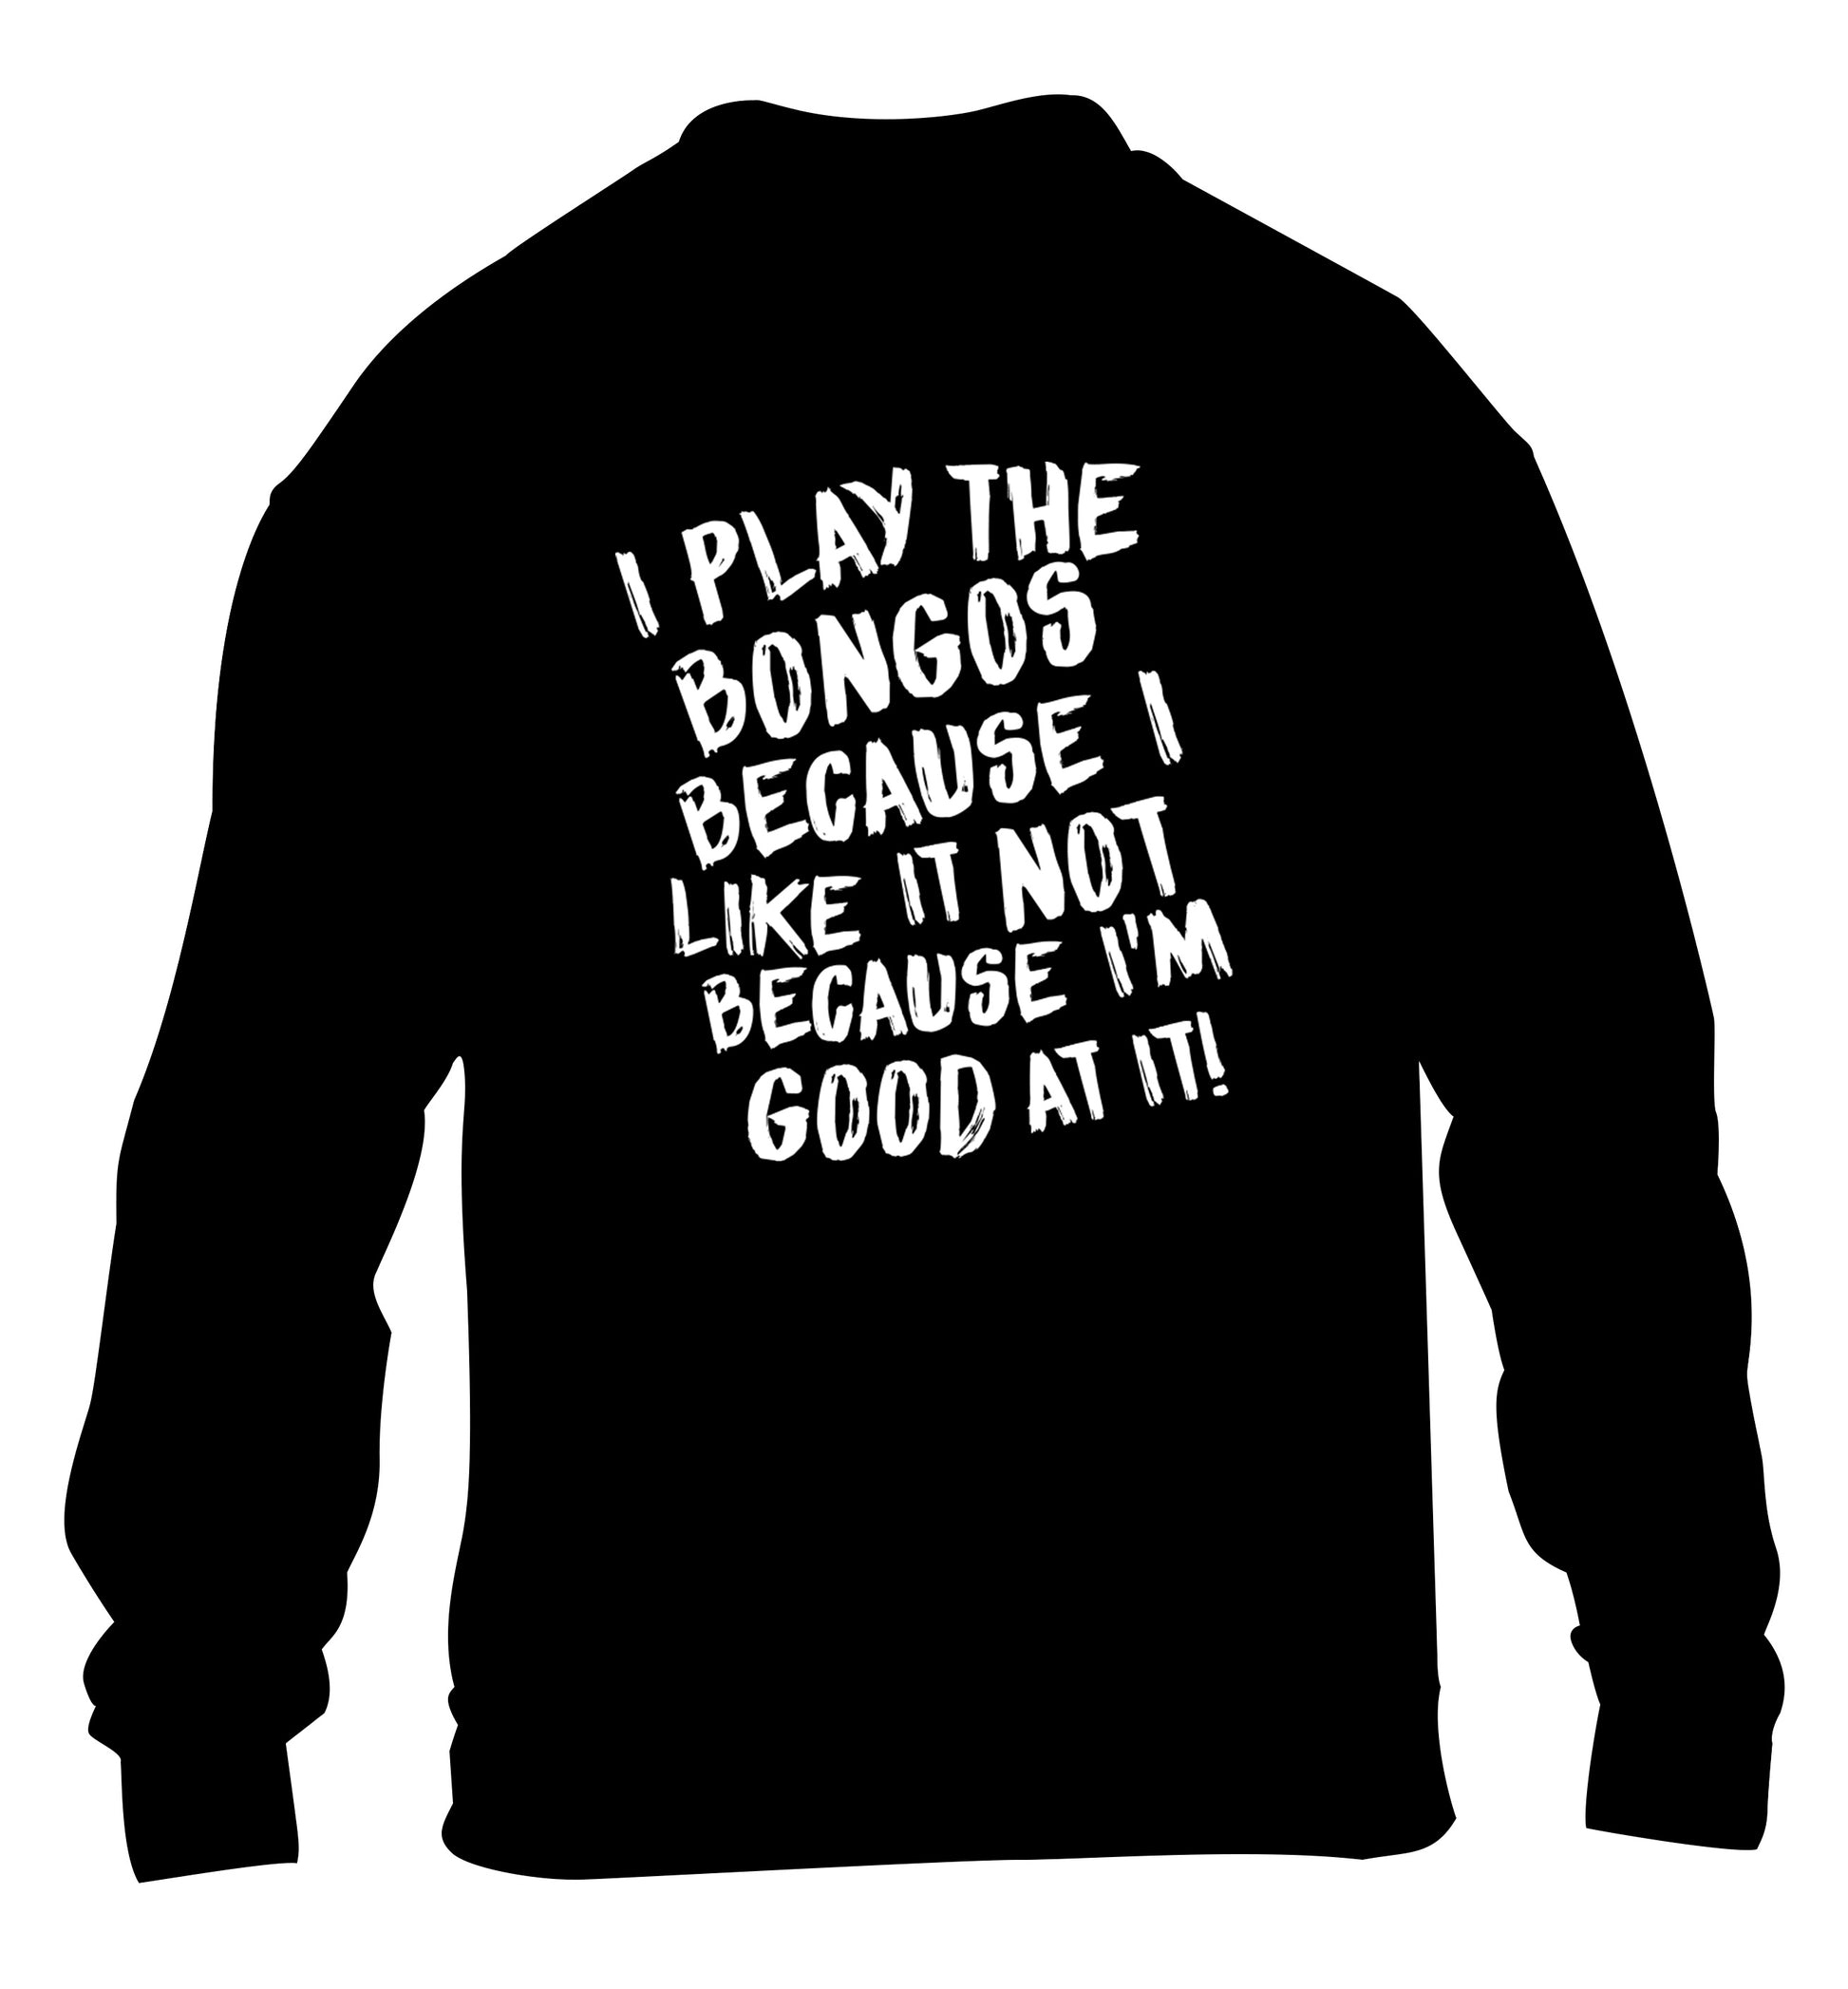 I play the bongos because I like it not because I'm good at it children's black sweater 12-14 Years